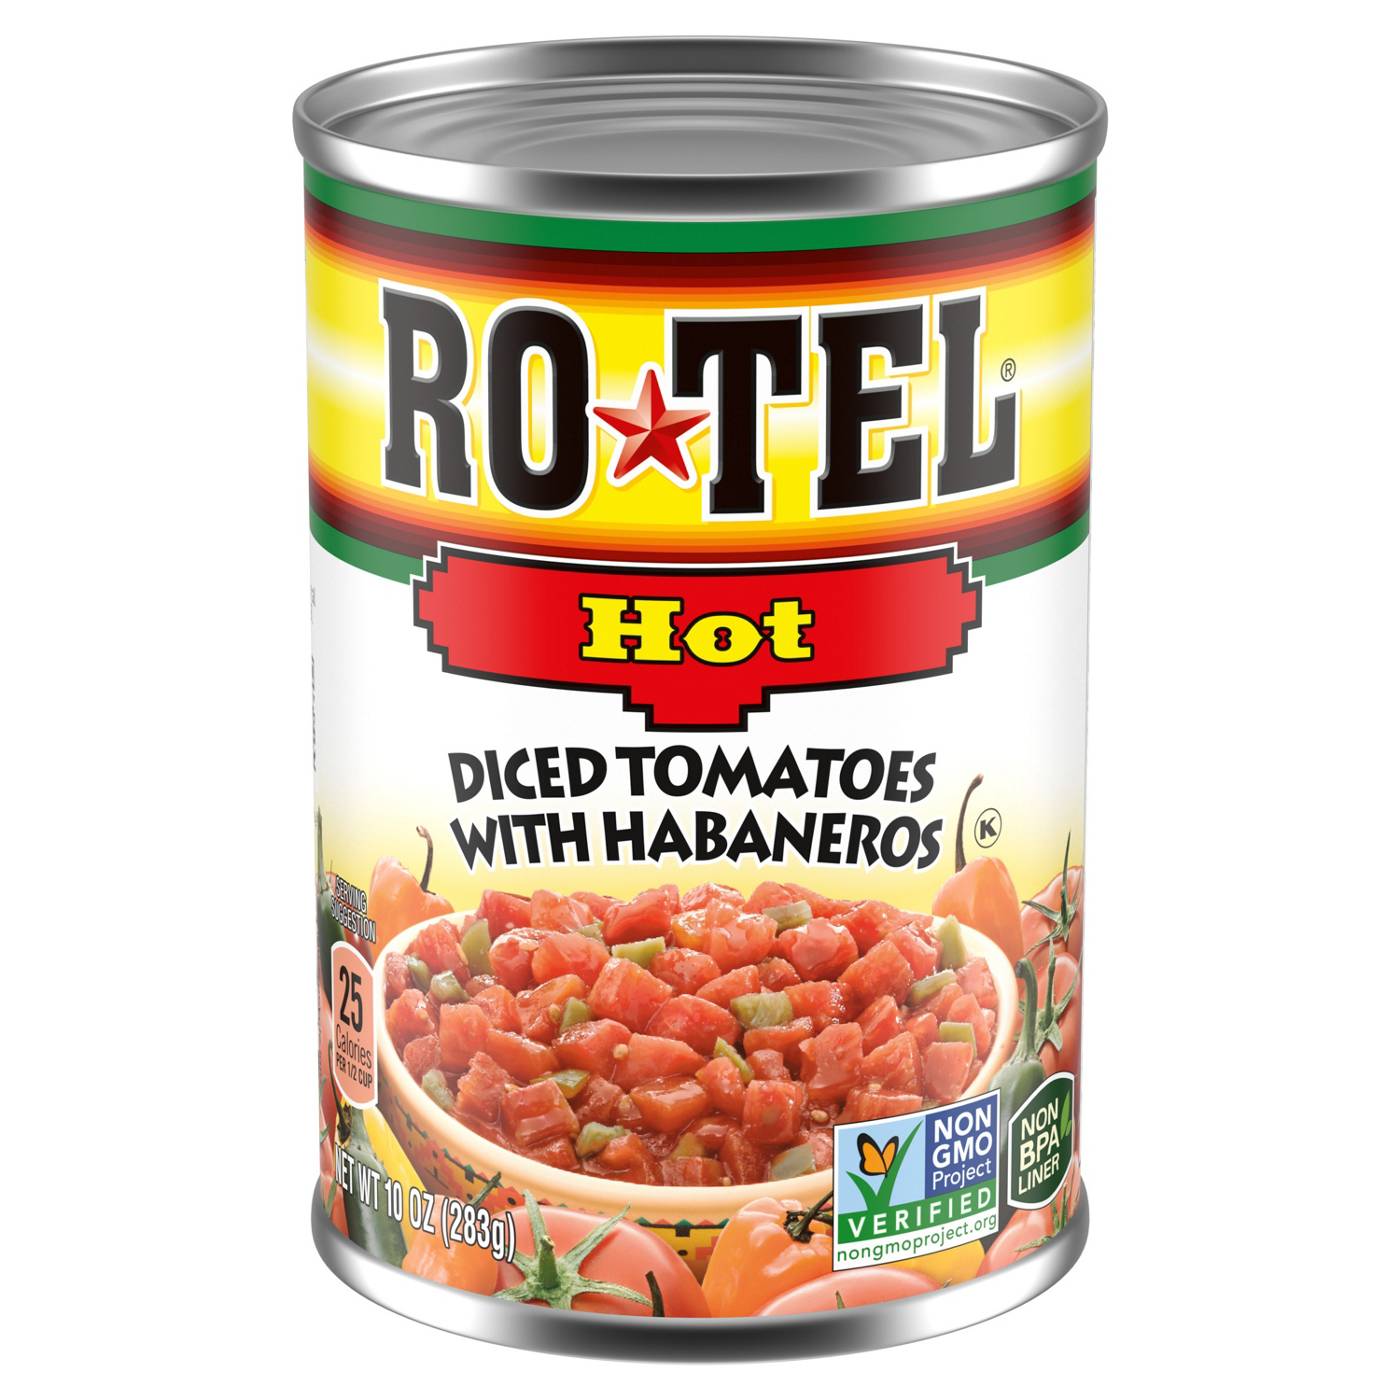 Ro-Tel Hot Diced Tomatoes With Habaneros; image 1 of 6